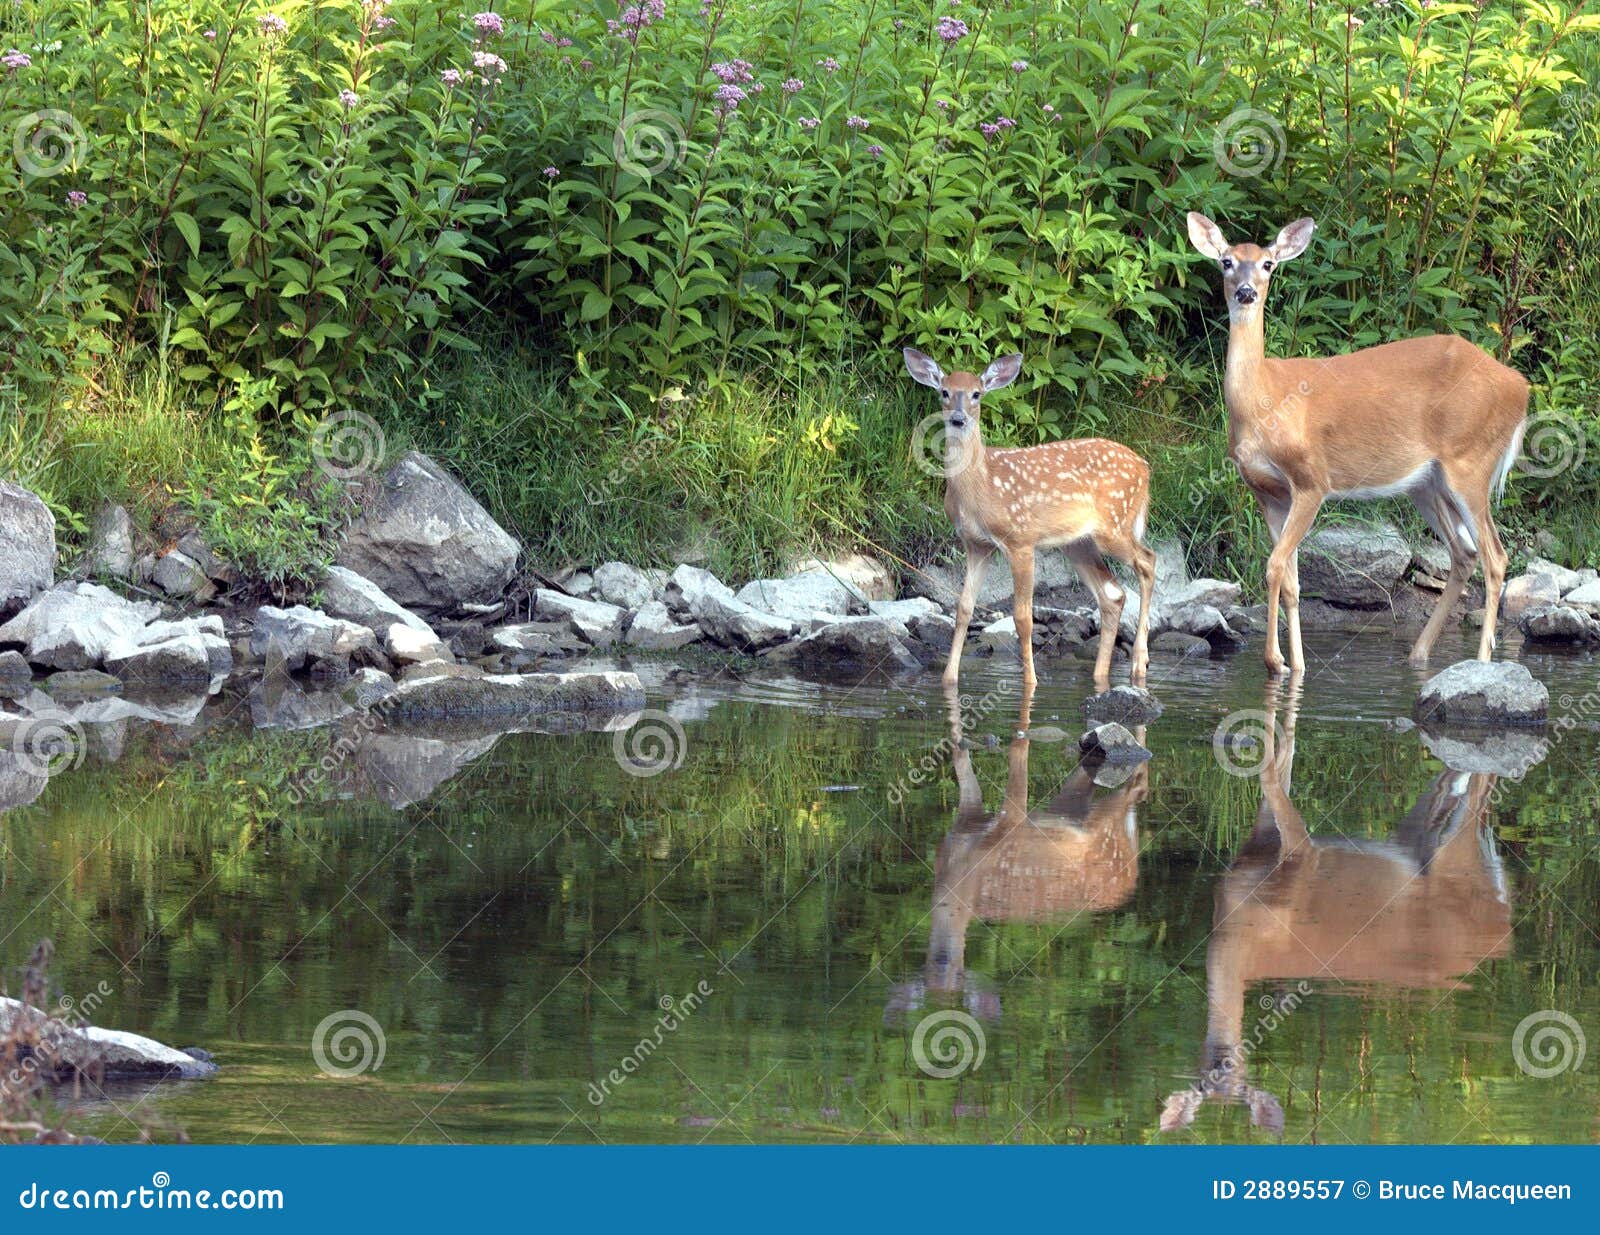 whitetail doe with fawn